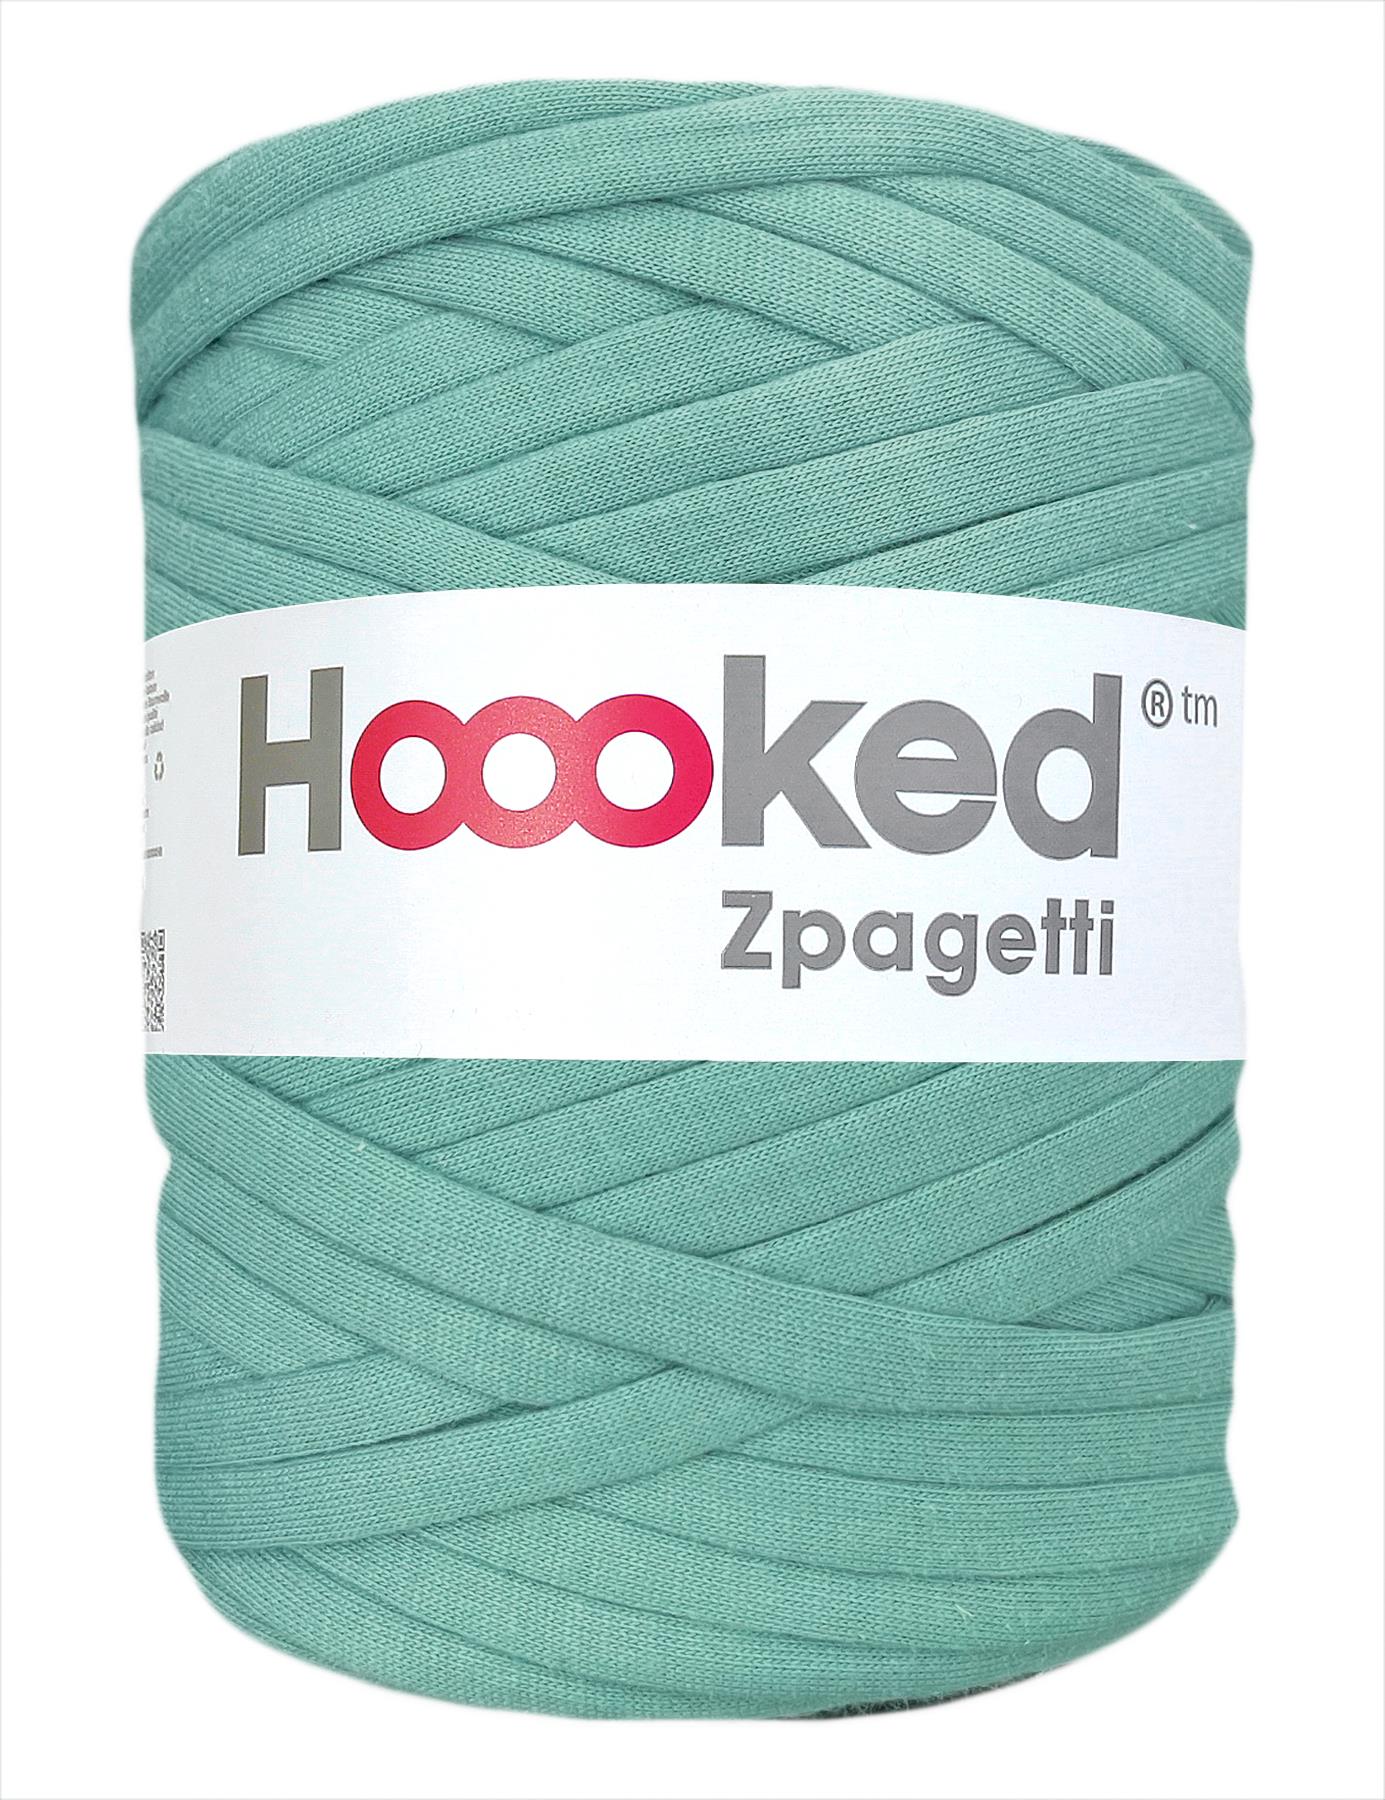 Muted teal green t-shirt yarn by Hoooked Zpagetti (100-120m)